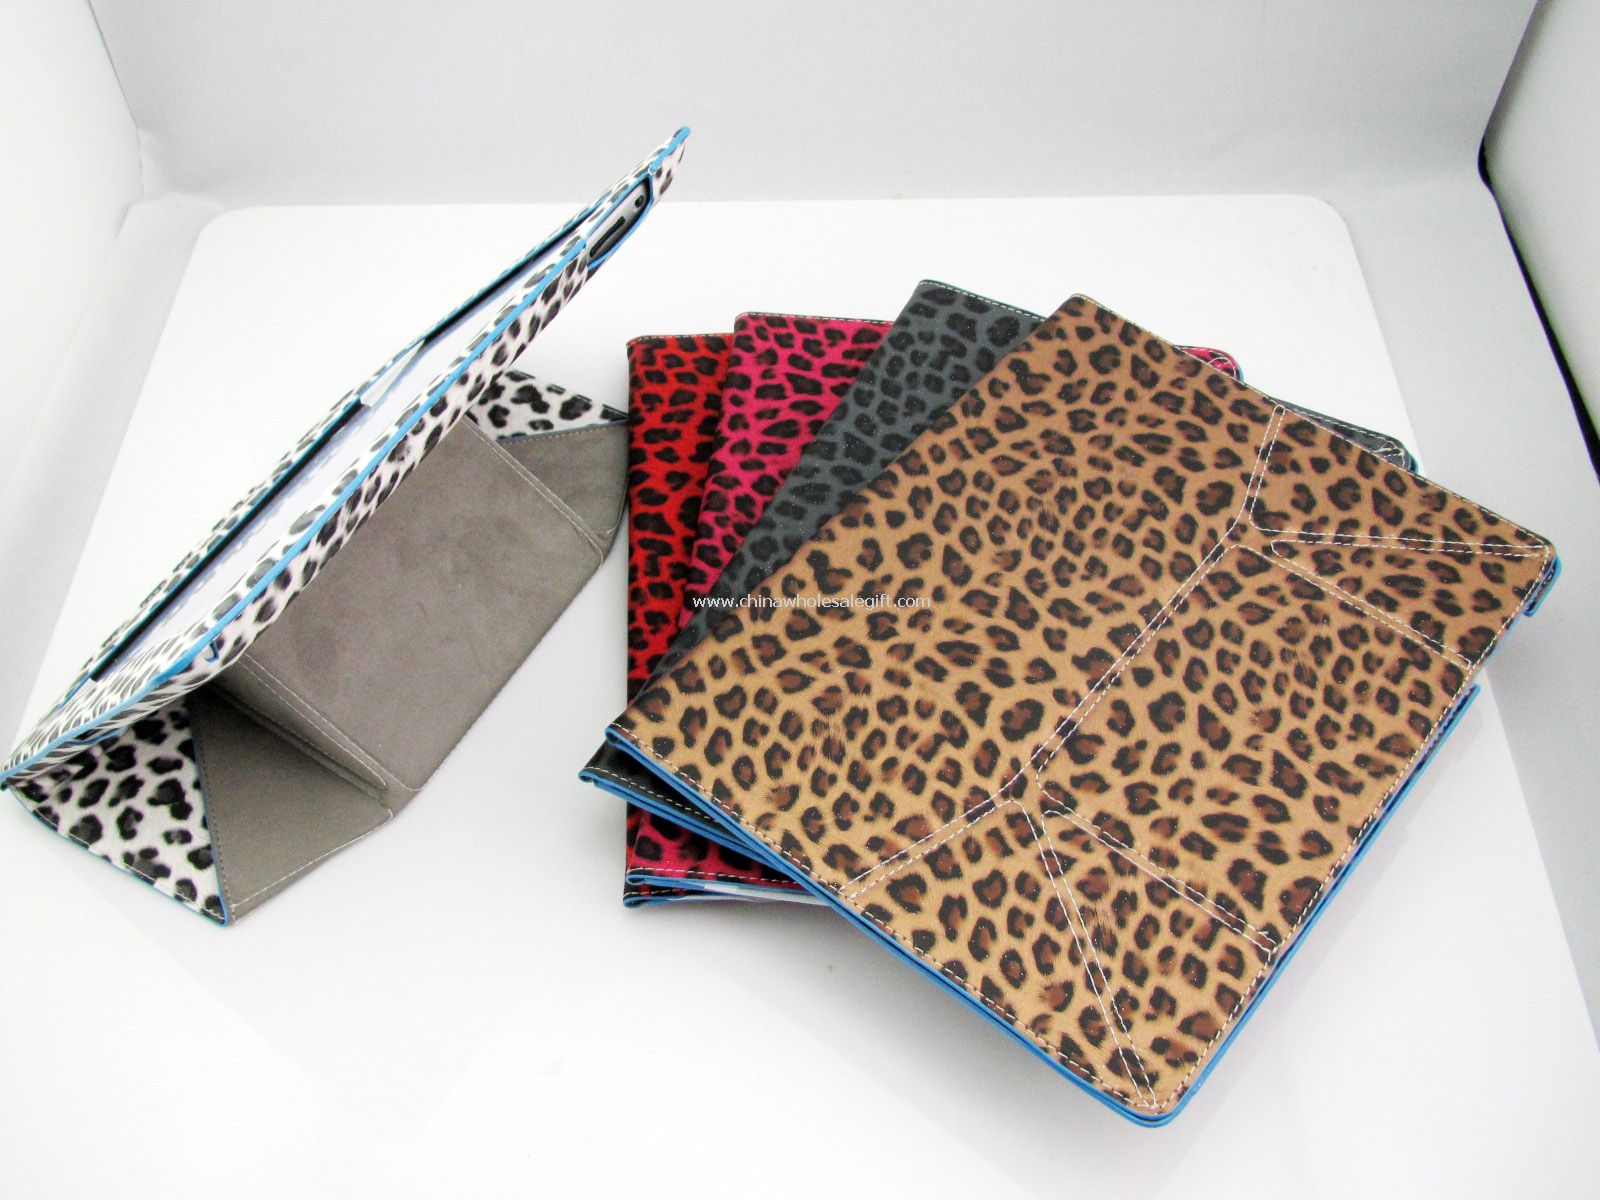 Leopard Leather Case Cover Stand Skin For Apple NEW iPad 3